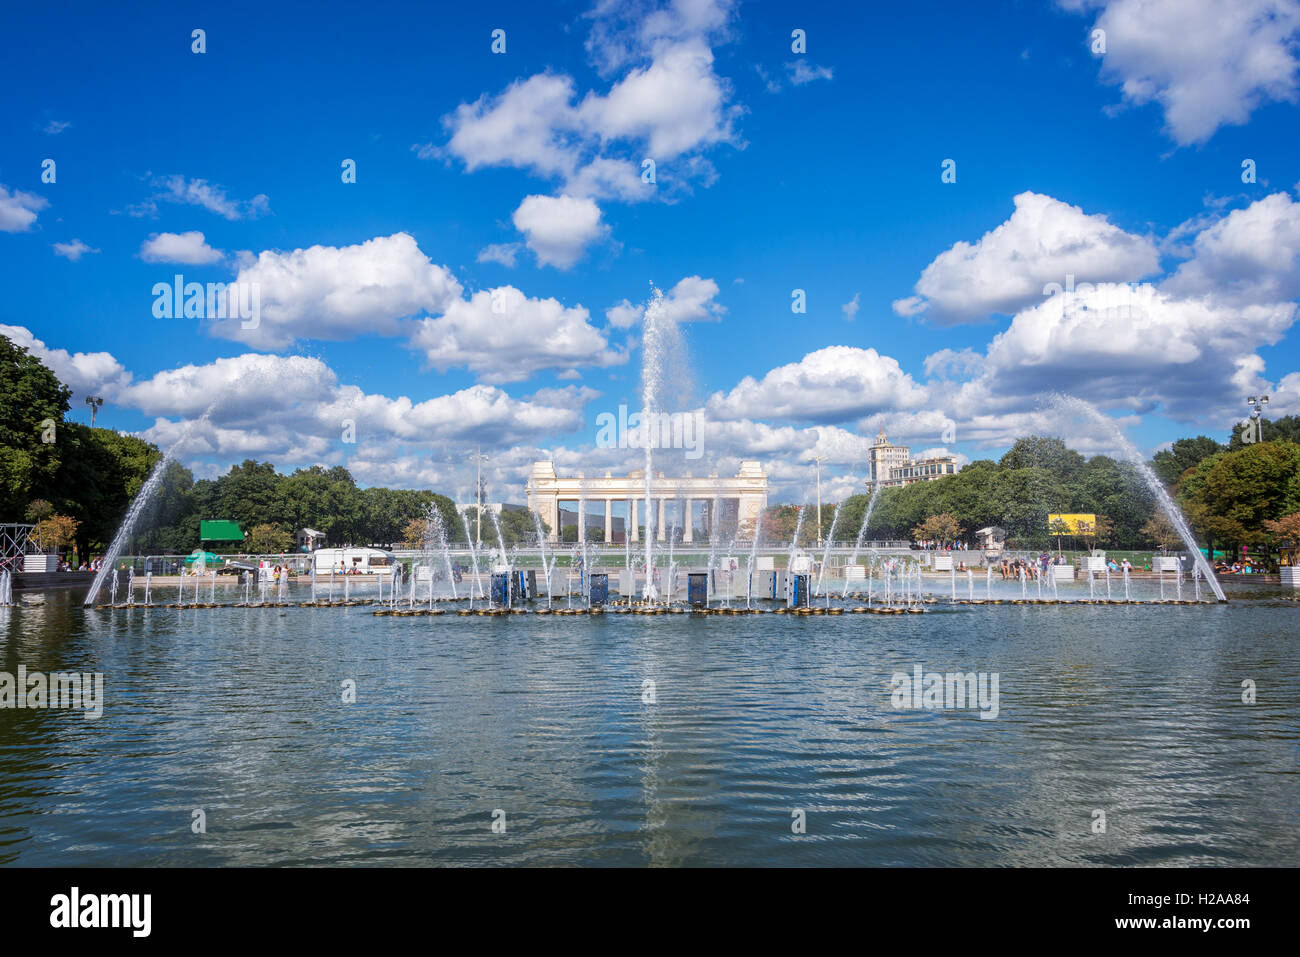 Fountain in Gorky park, Moscow, Russia Stock Photo